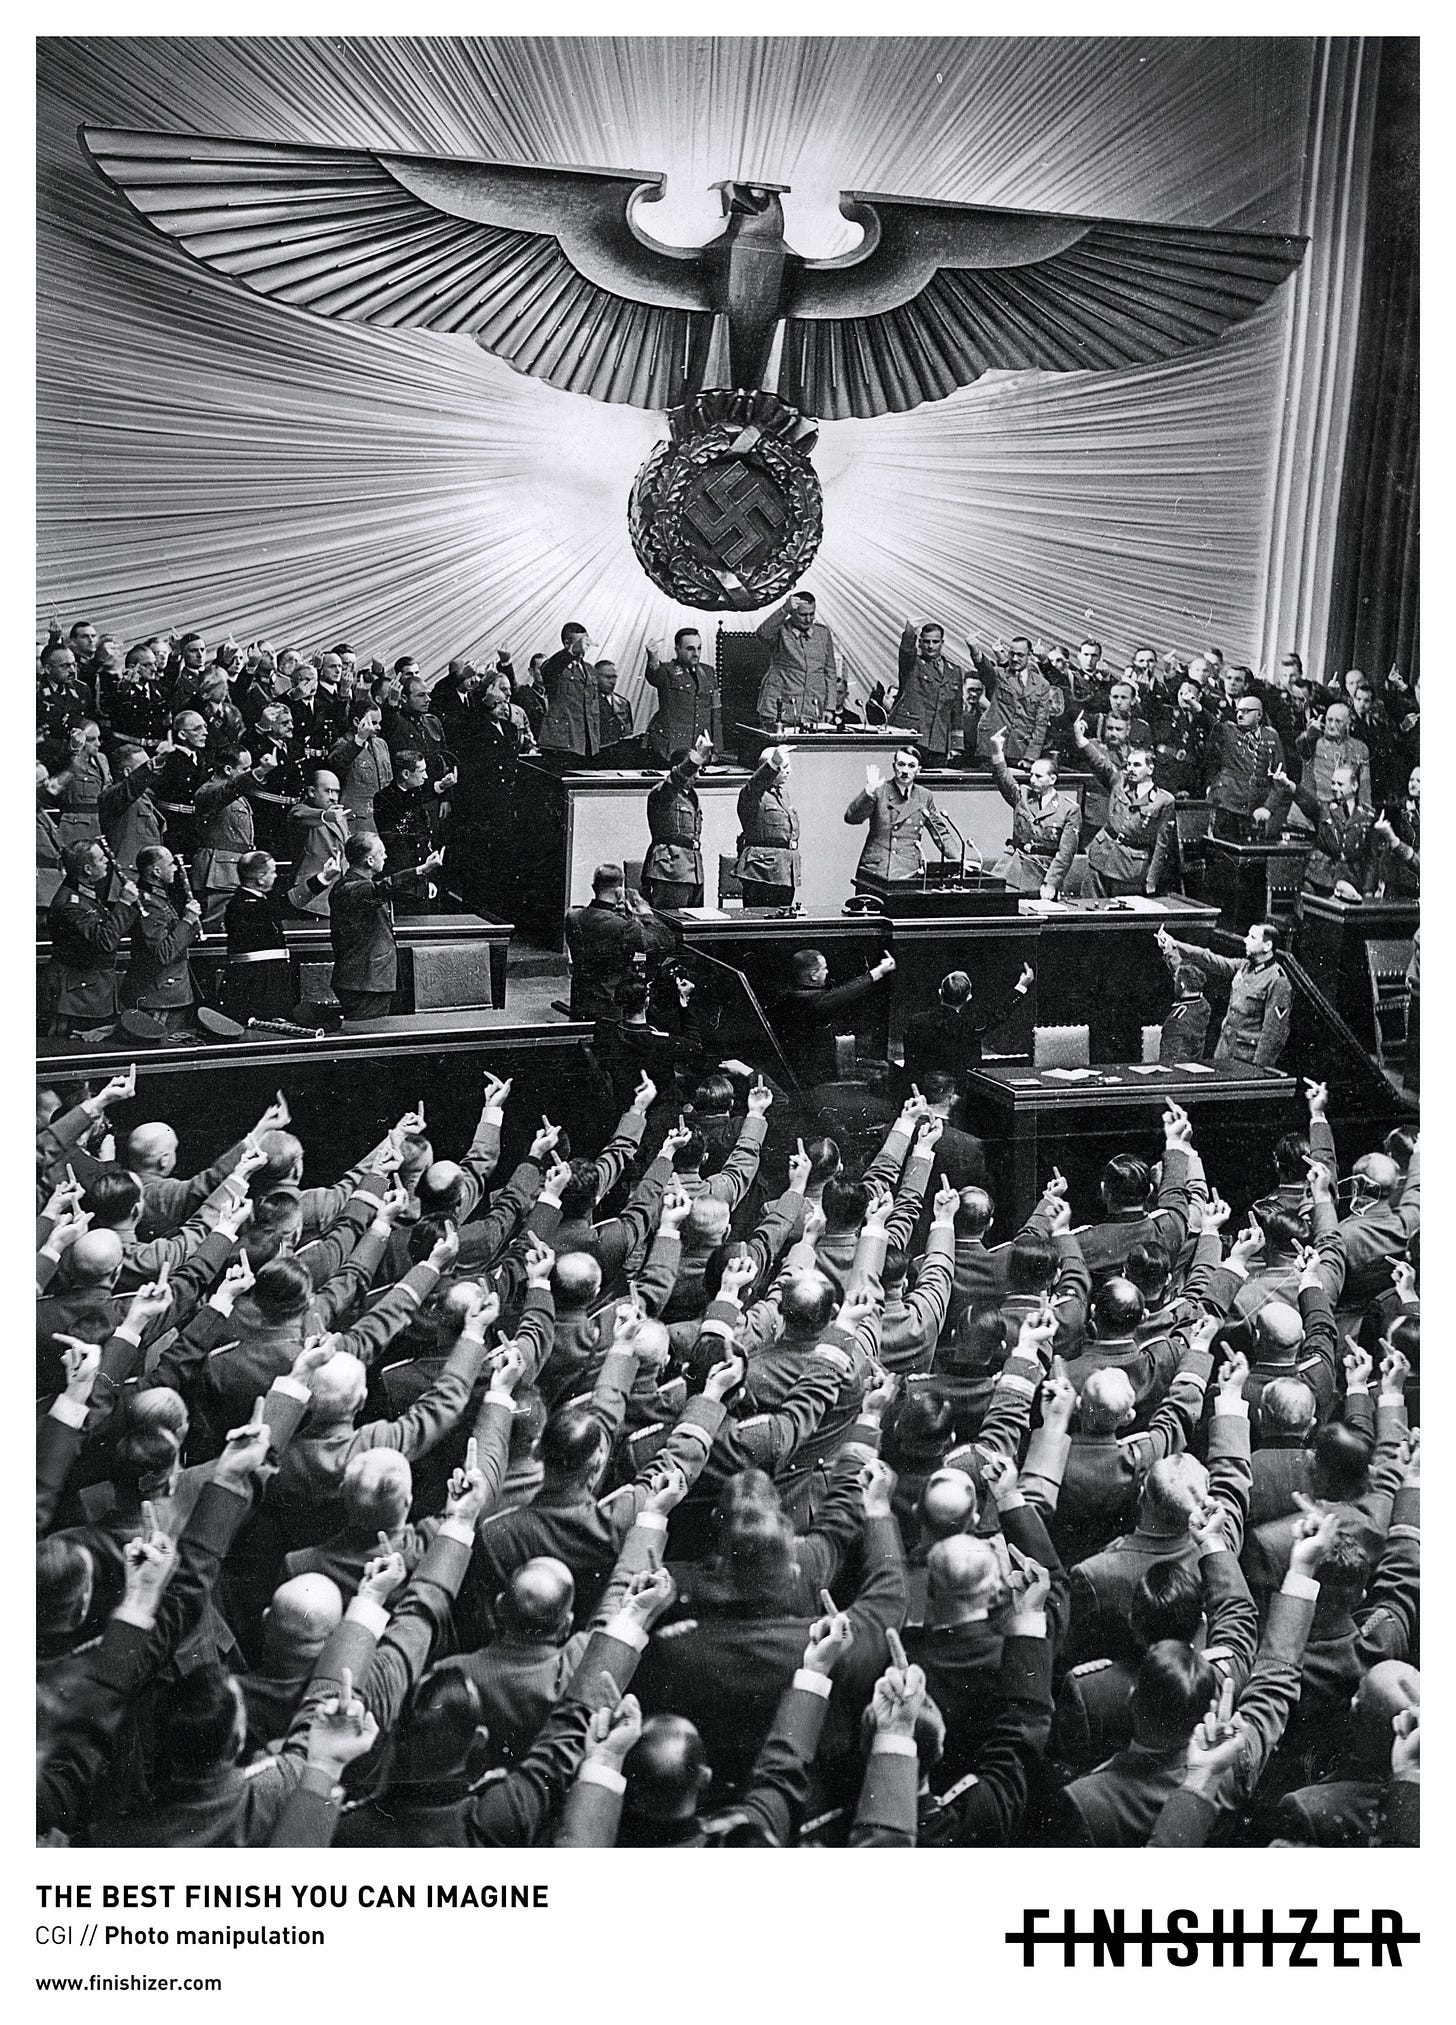 Finishizer Print Advert By Ogilvy: Fail Hitler | Ads of the World™